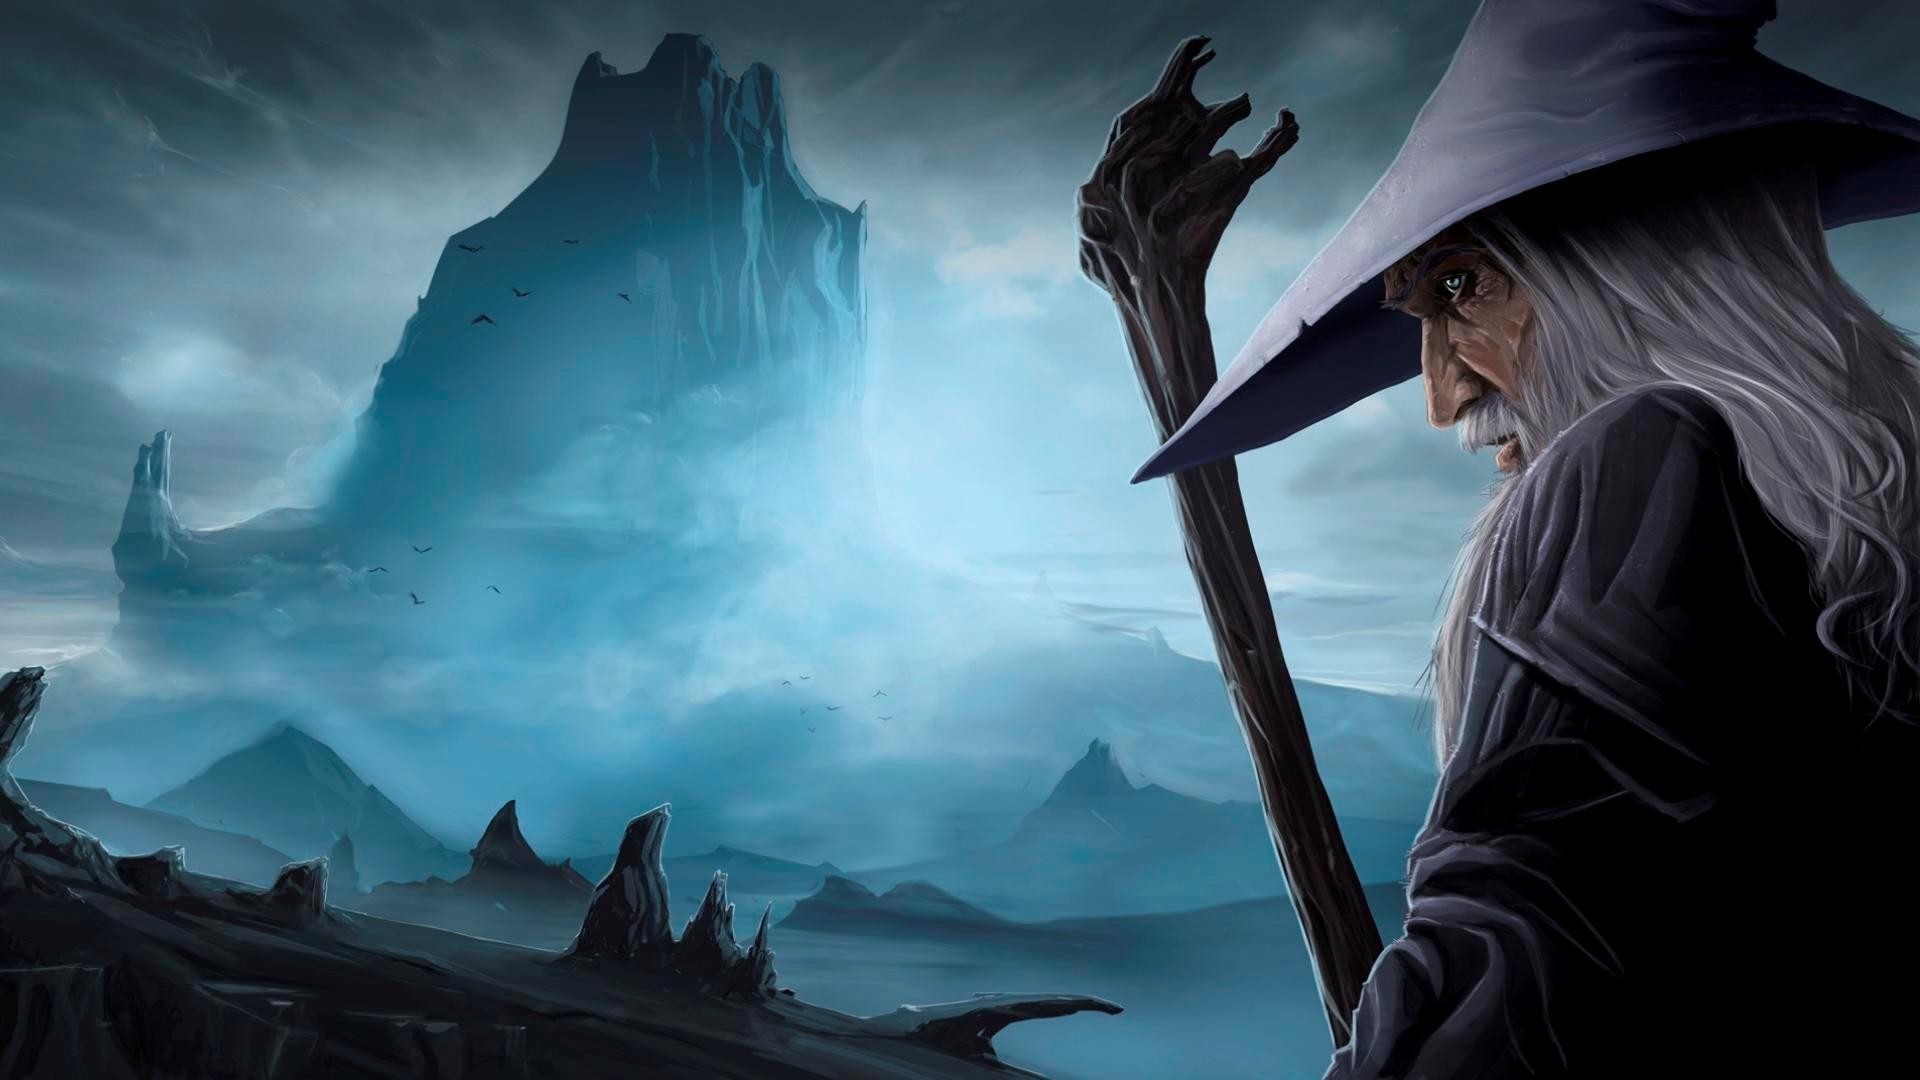 1920x1080, Gandalf - Lord Of The Rings Gandalf Background - HD Wallpaper 